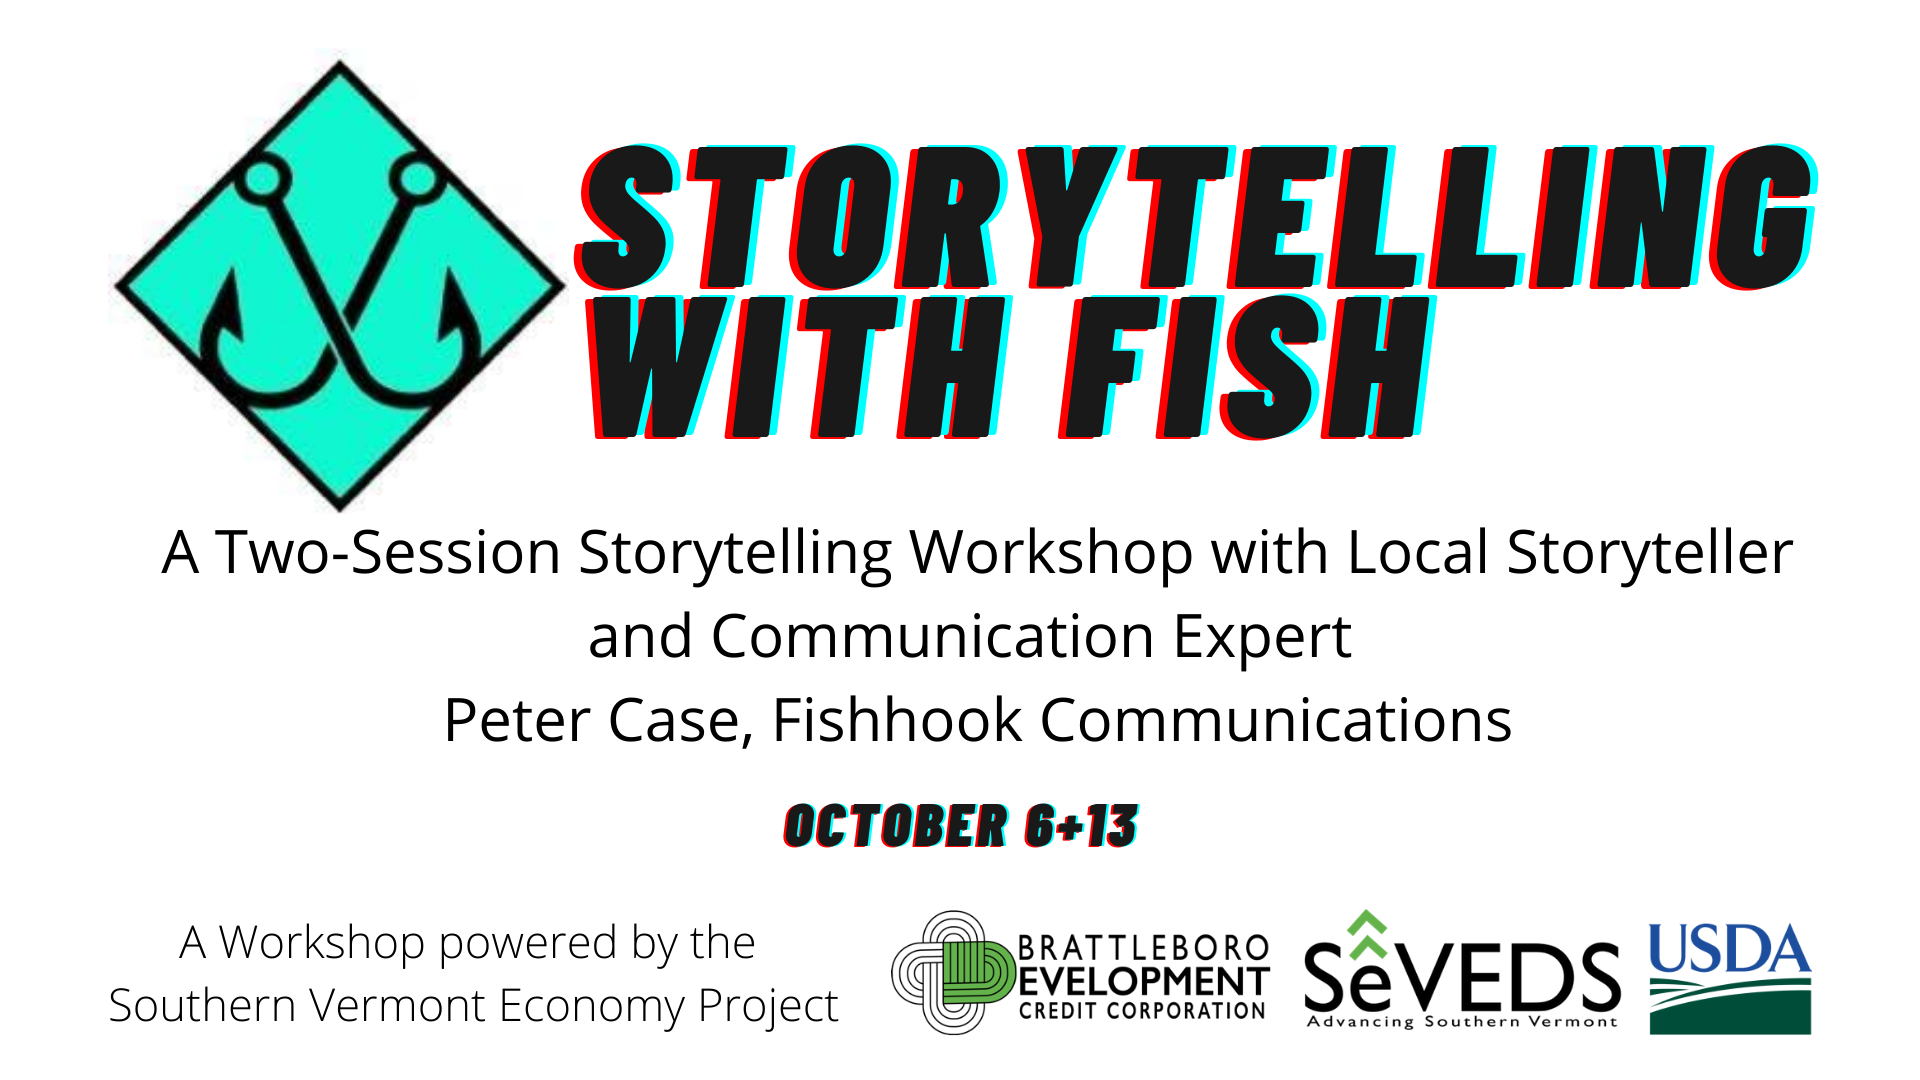 Storytelling with Fish 2